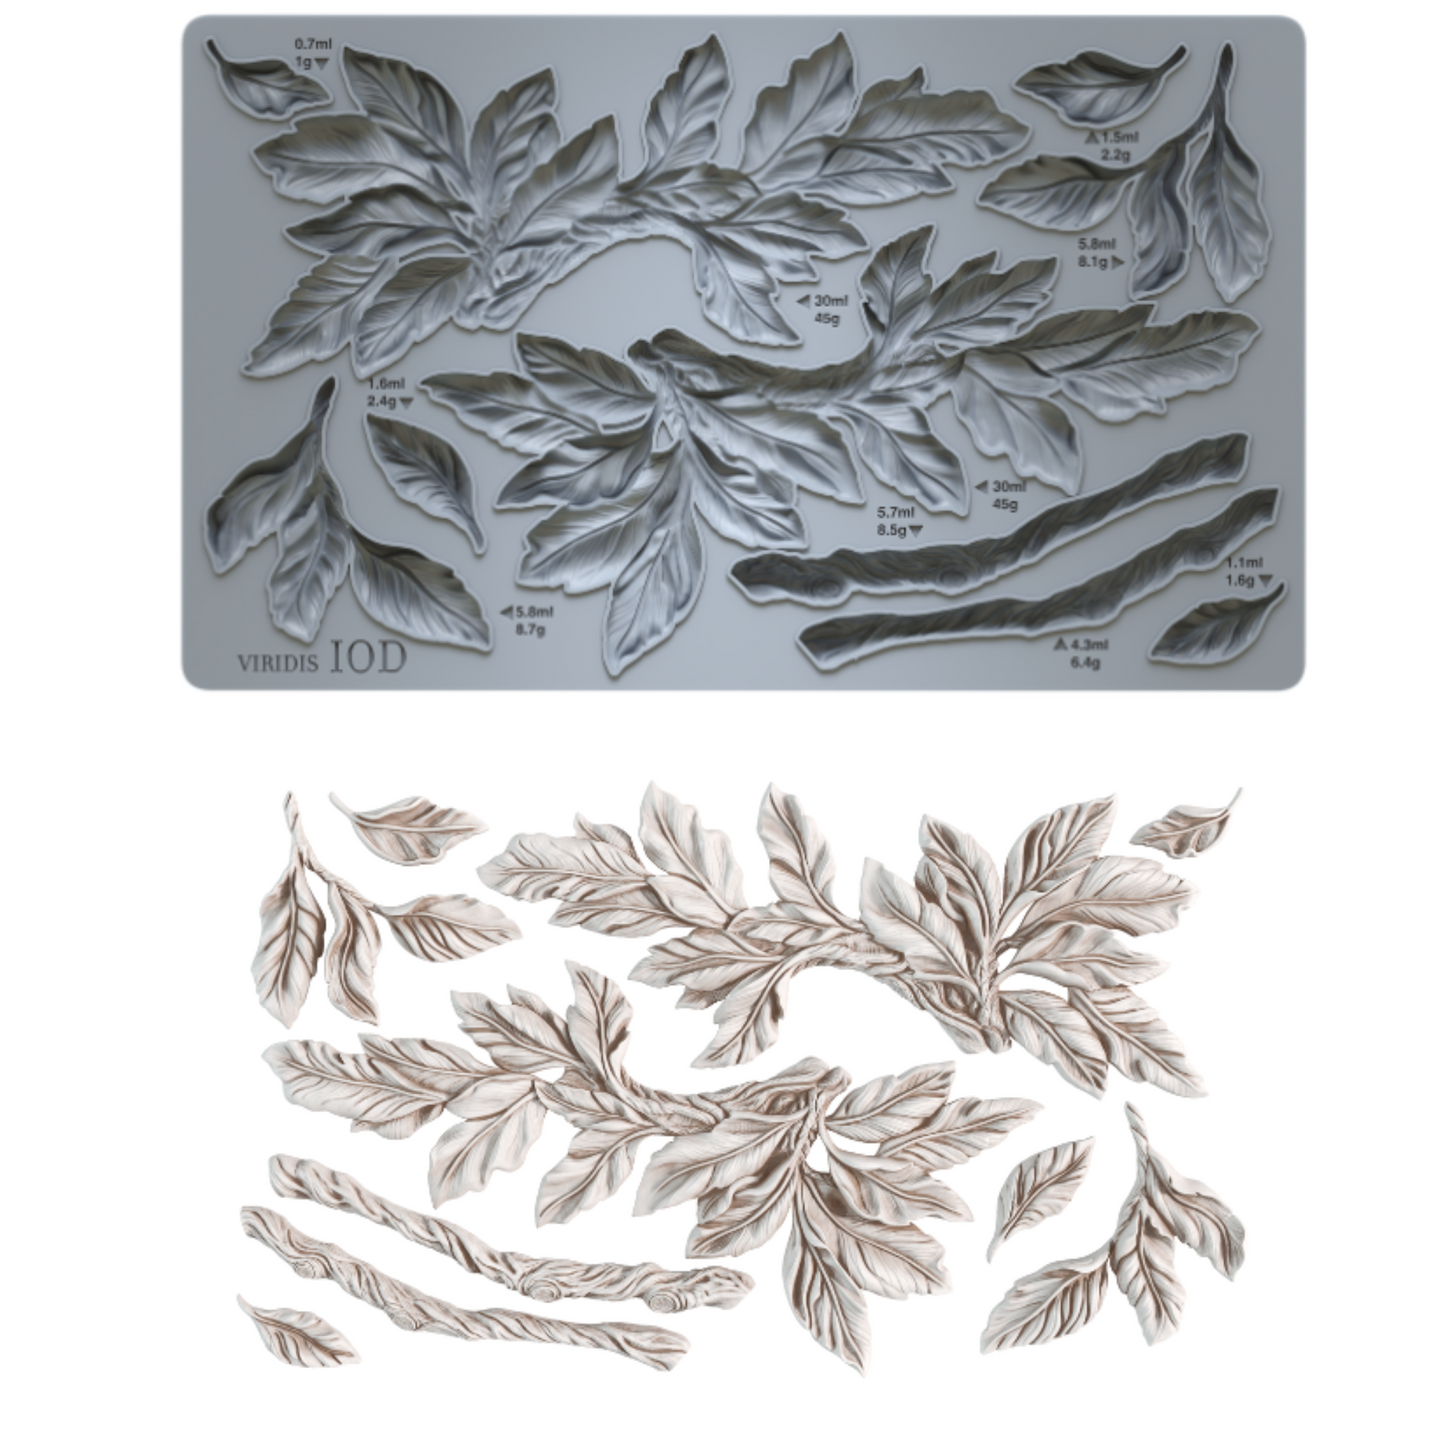 "Veridis" IOD Mould by Iron Orchid Designs. Product photo with casting side by side. Available at Milton's Daughter.